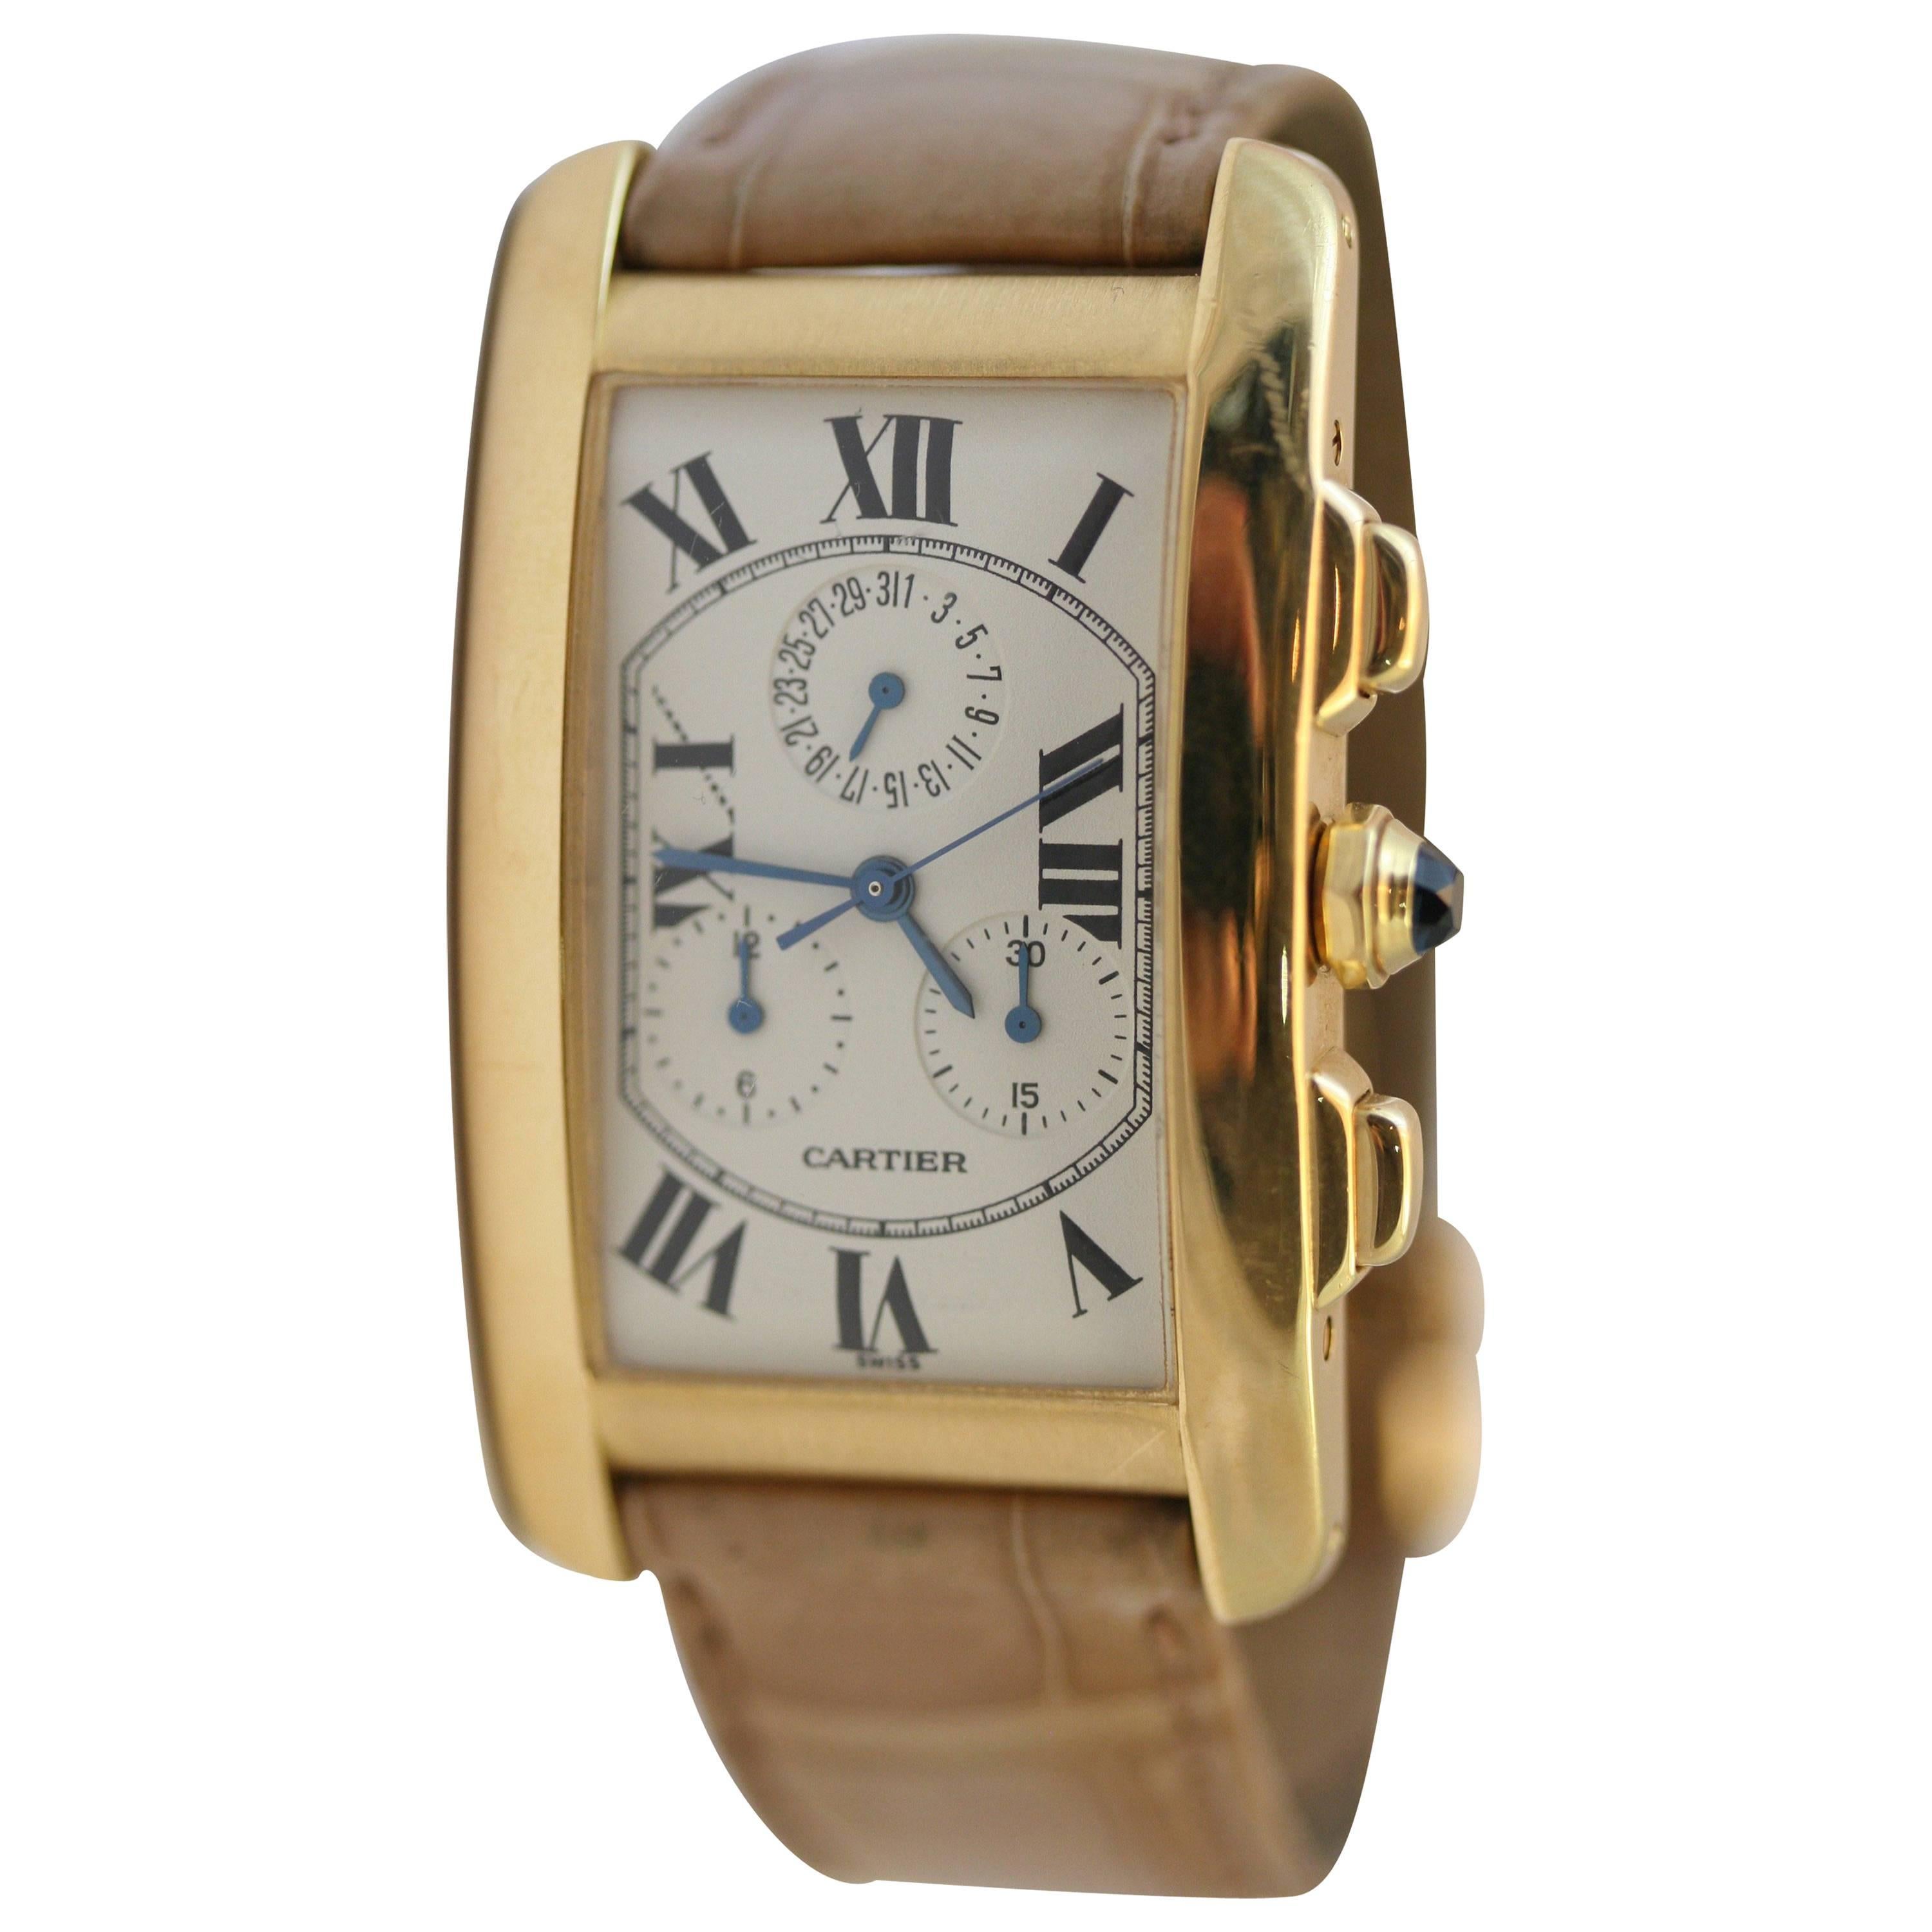 Montre Cartier - 4 For Sale on 1stDibs | cartier montre, cartier vintage  montre, montre cartier femme